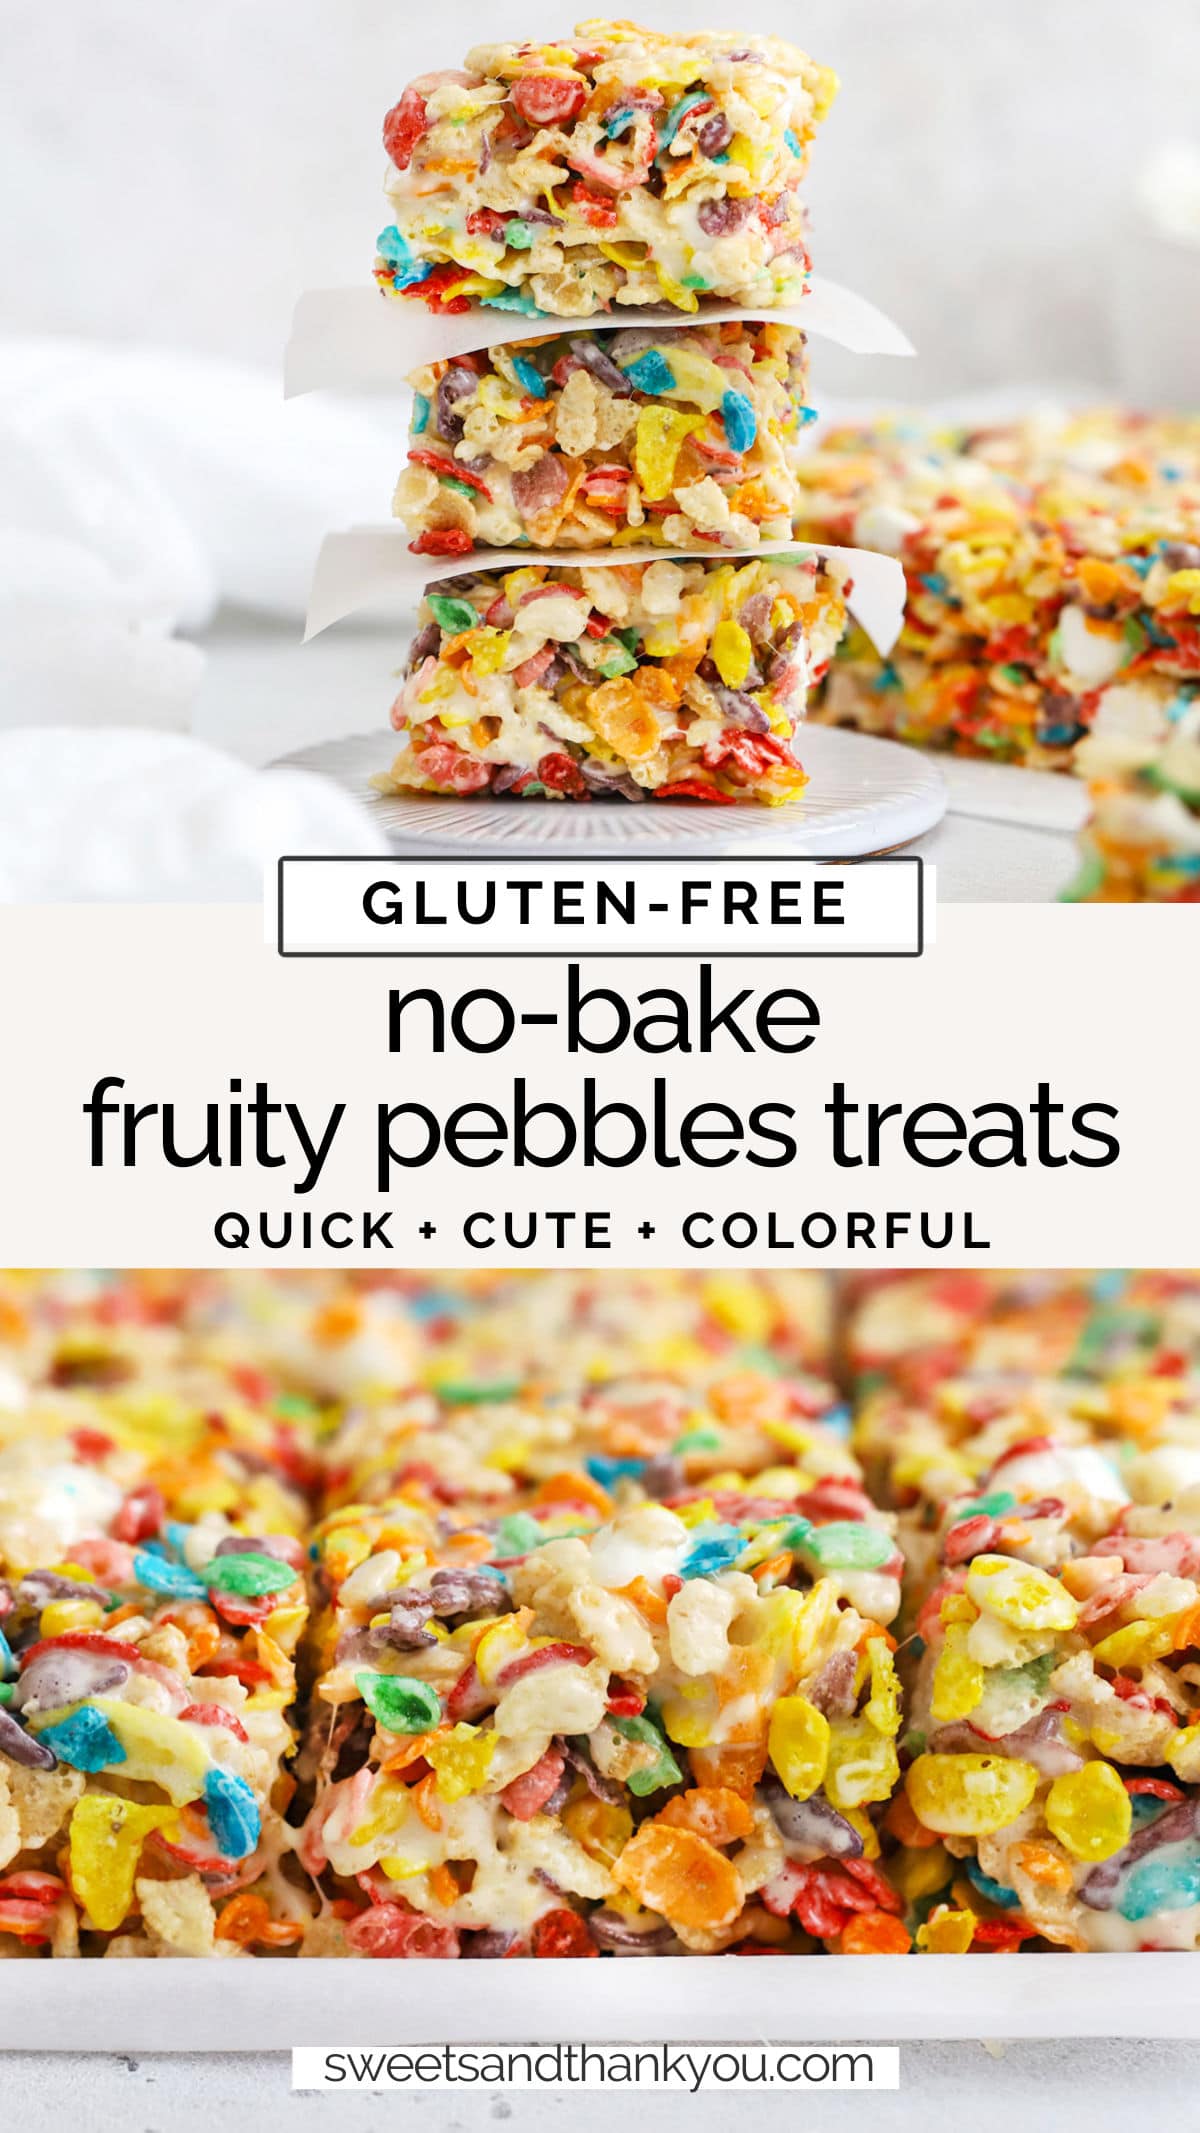 Gluten-Free Fruity Pebbles Treats - These easy fruity pebbles crispy treats are a simple no-bake treat you'll love. // gluten-free no bake dessert // gluten-free cereal bars // gluten free fruity pebbles rice krispies treats // gluten-free fruity pebbles rice crispy treats // fruity pebbles crispy treats // gluten-free fruity pebbles cereal treats // gluten-free dessert // kid friendly dessert // rainbow desserts // st. patricks day dessert // colorful dessert recipes //